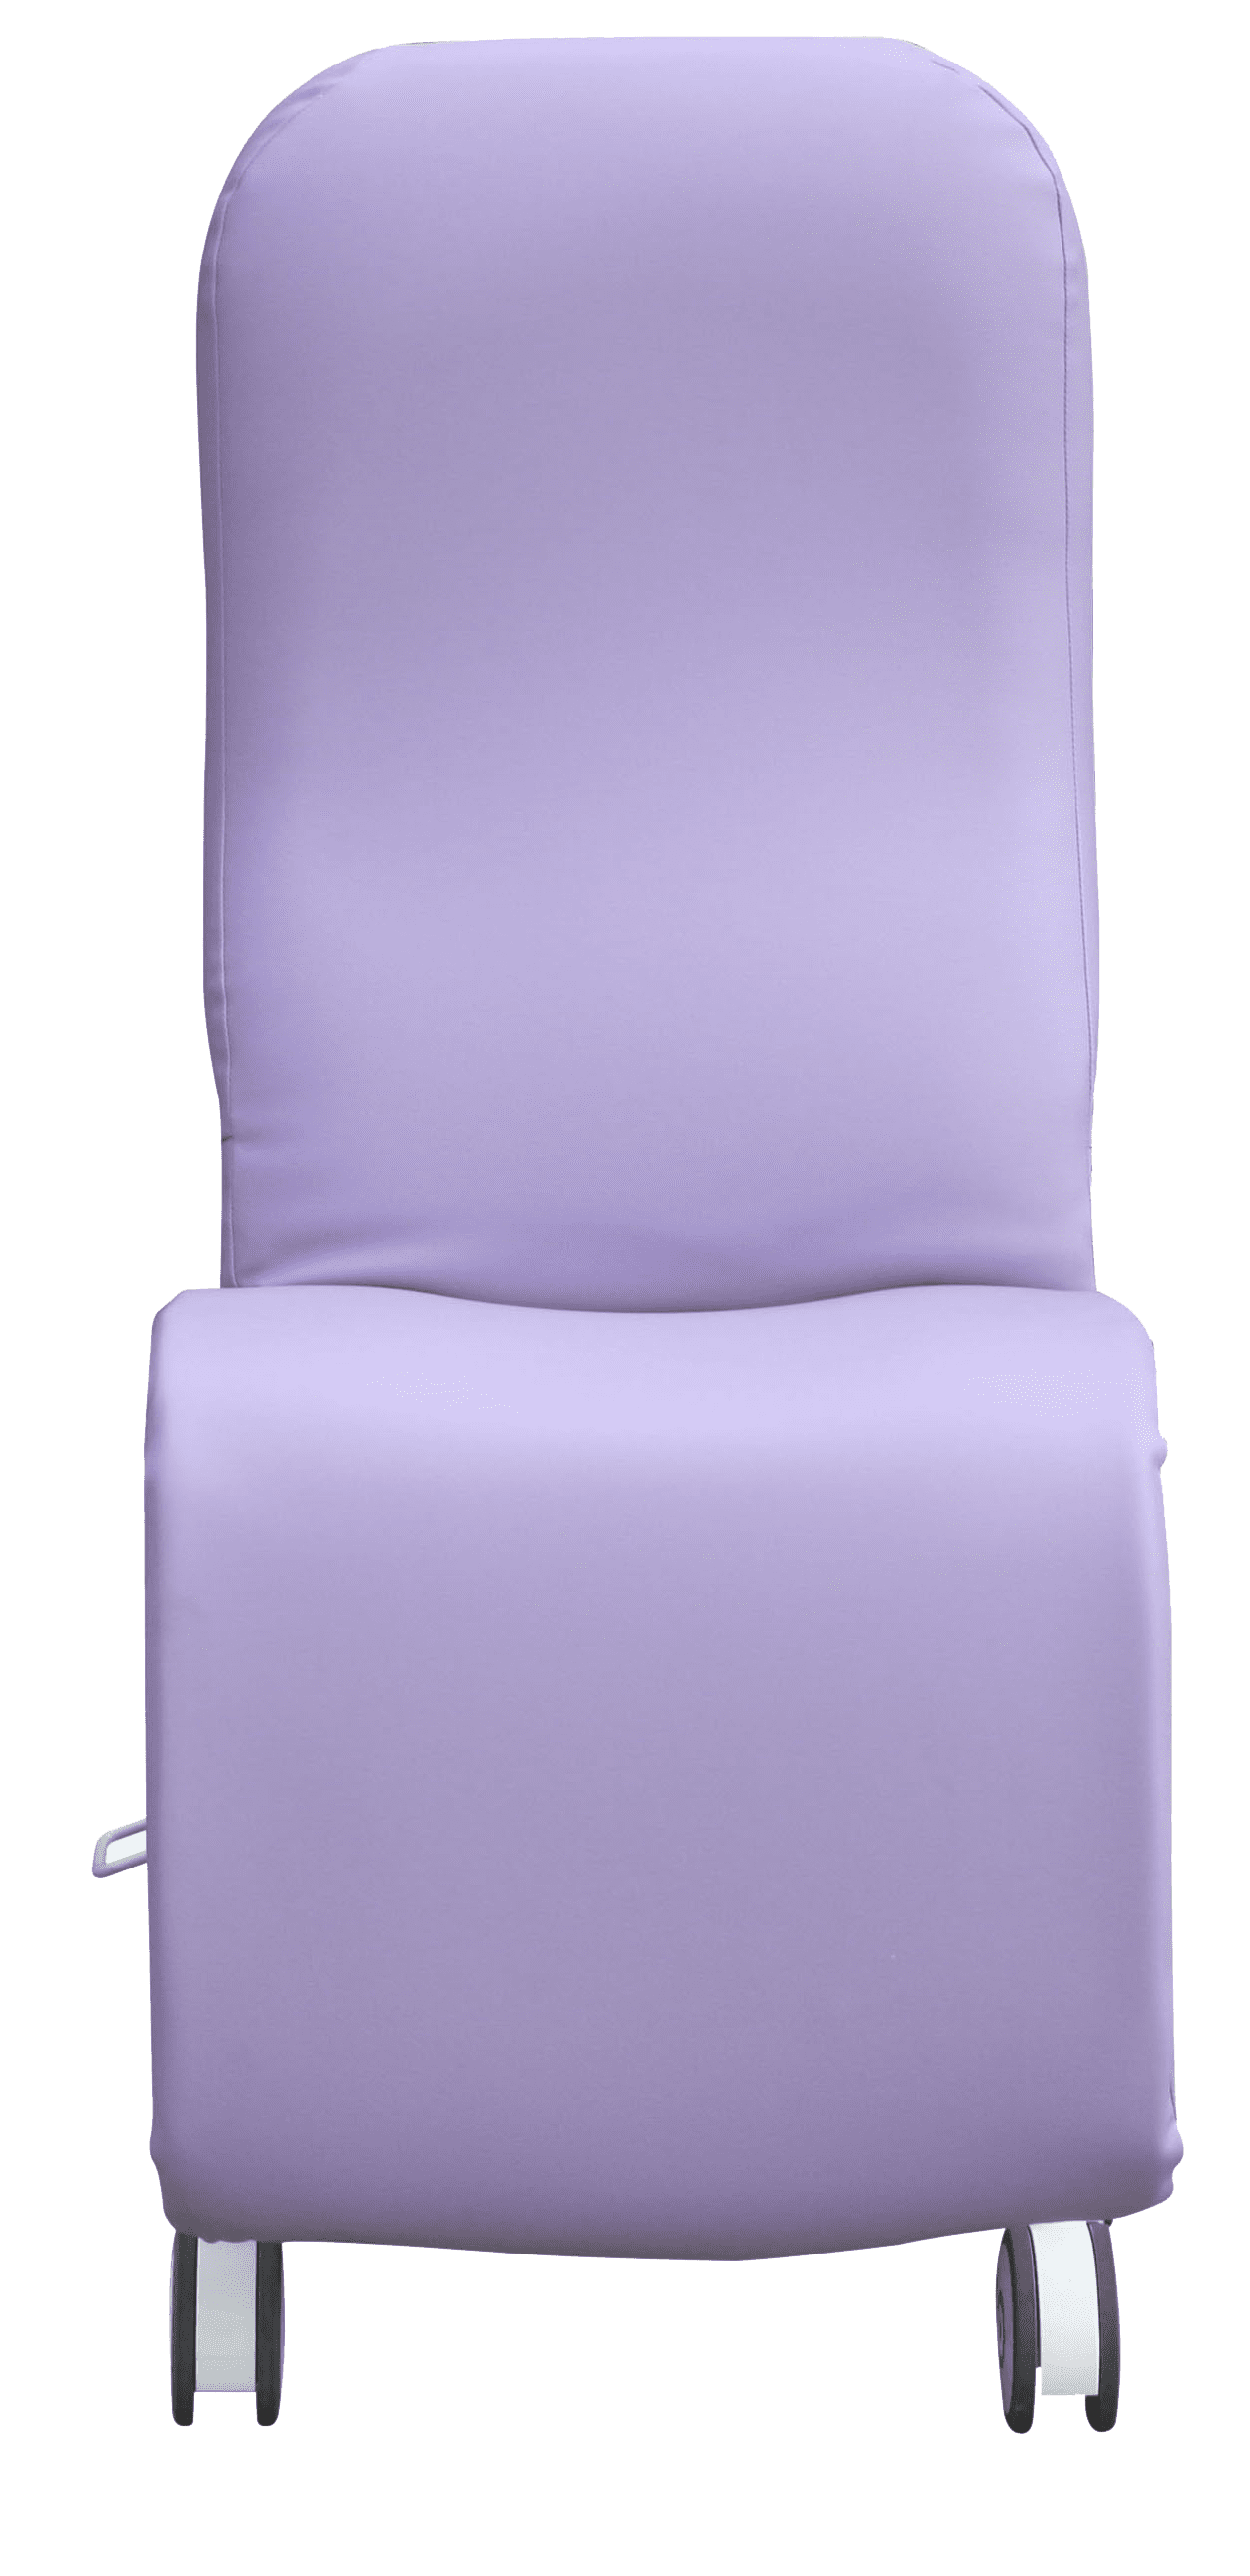 Medical-treatment-recliner-chair-fast-cpr